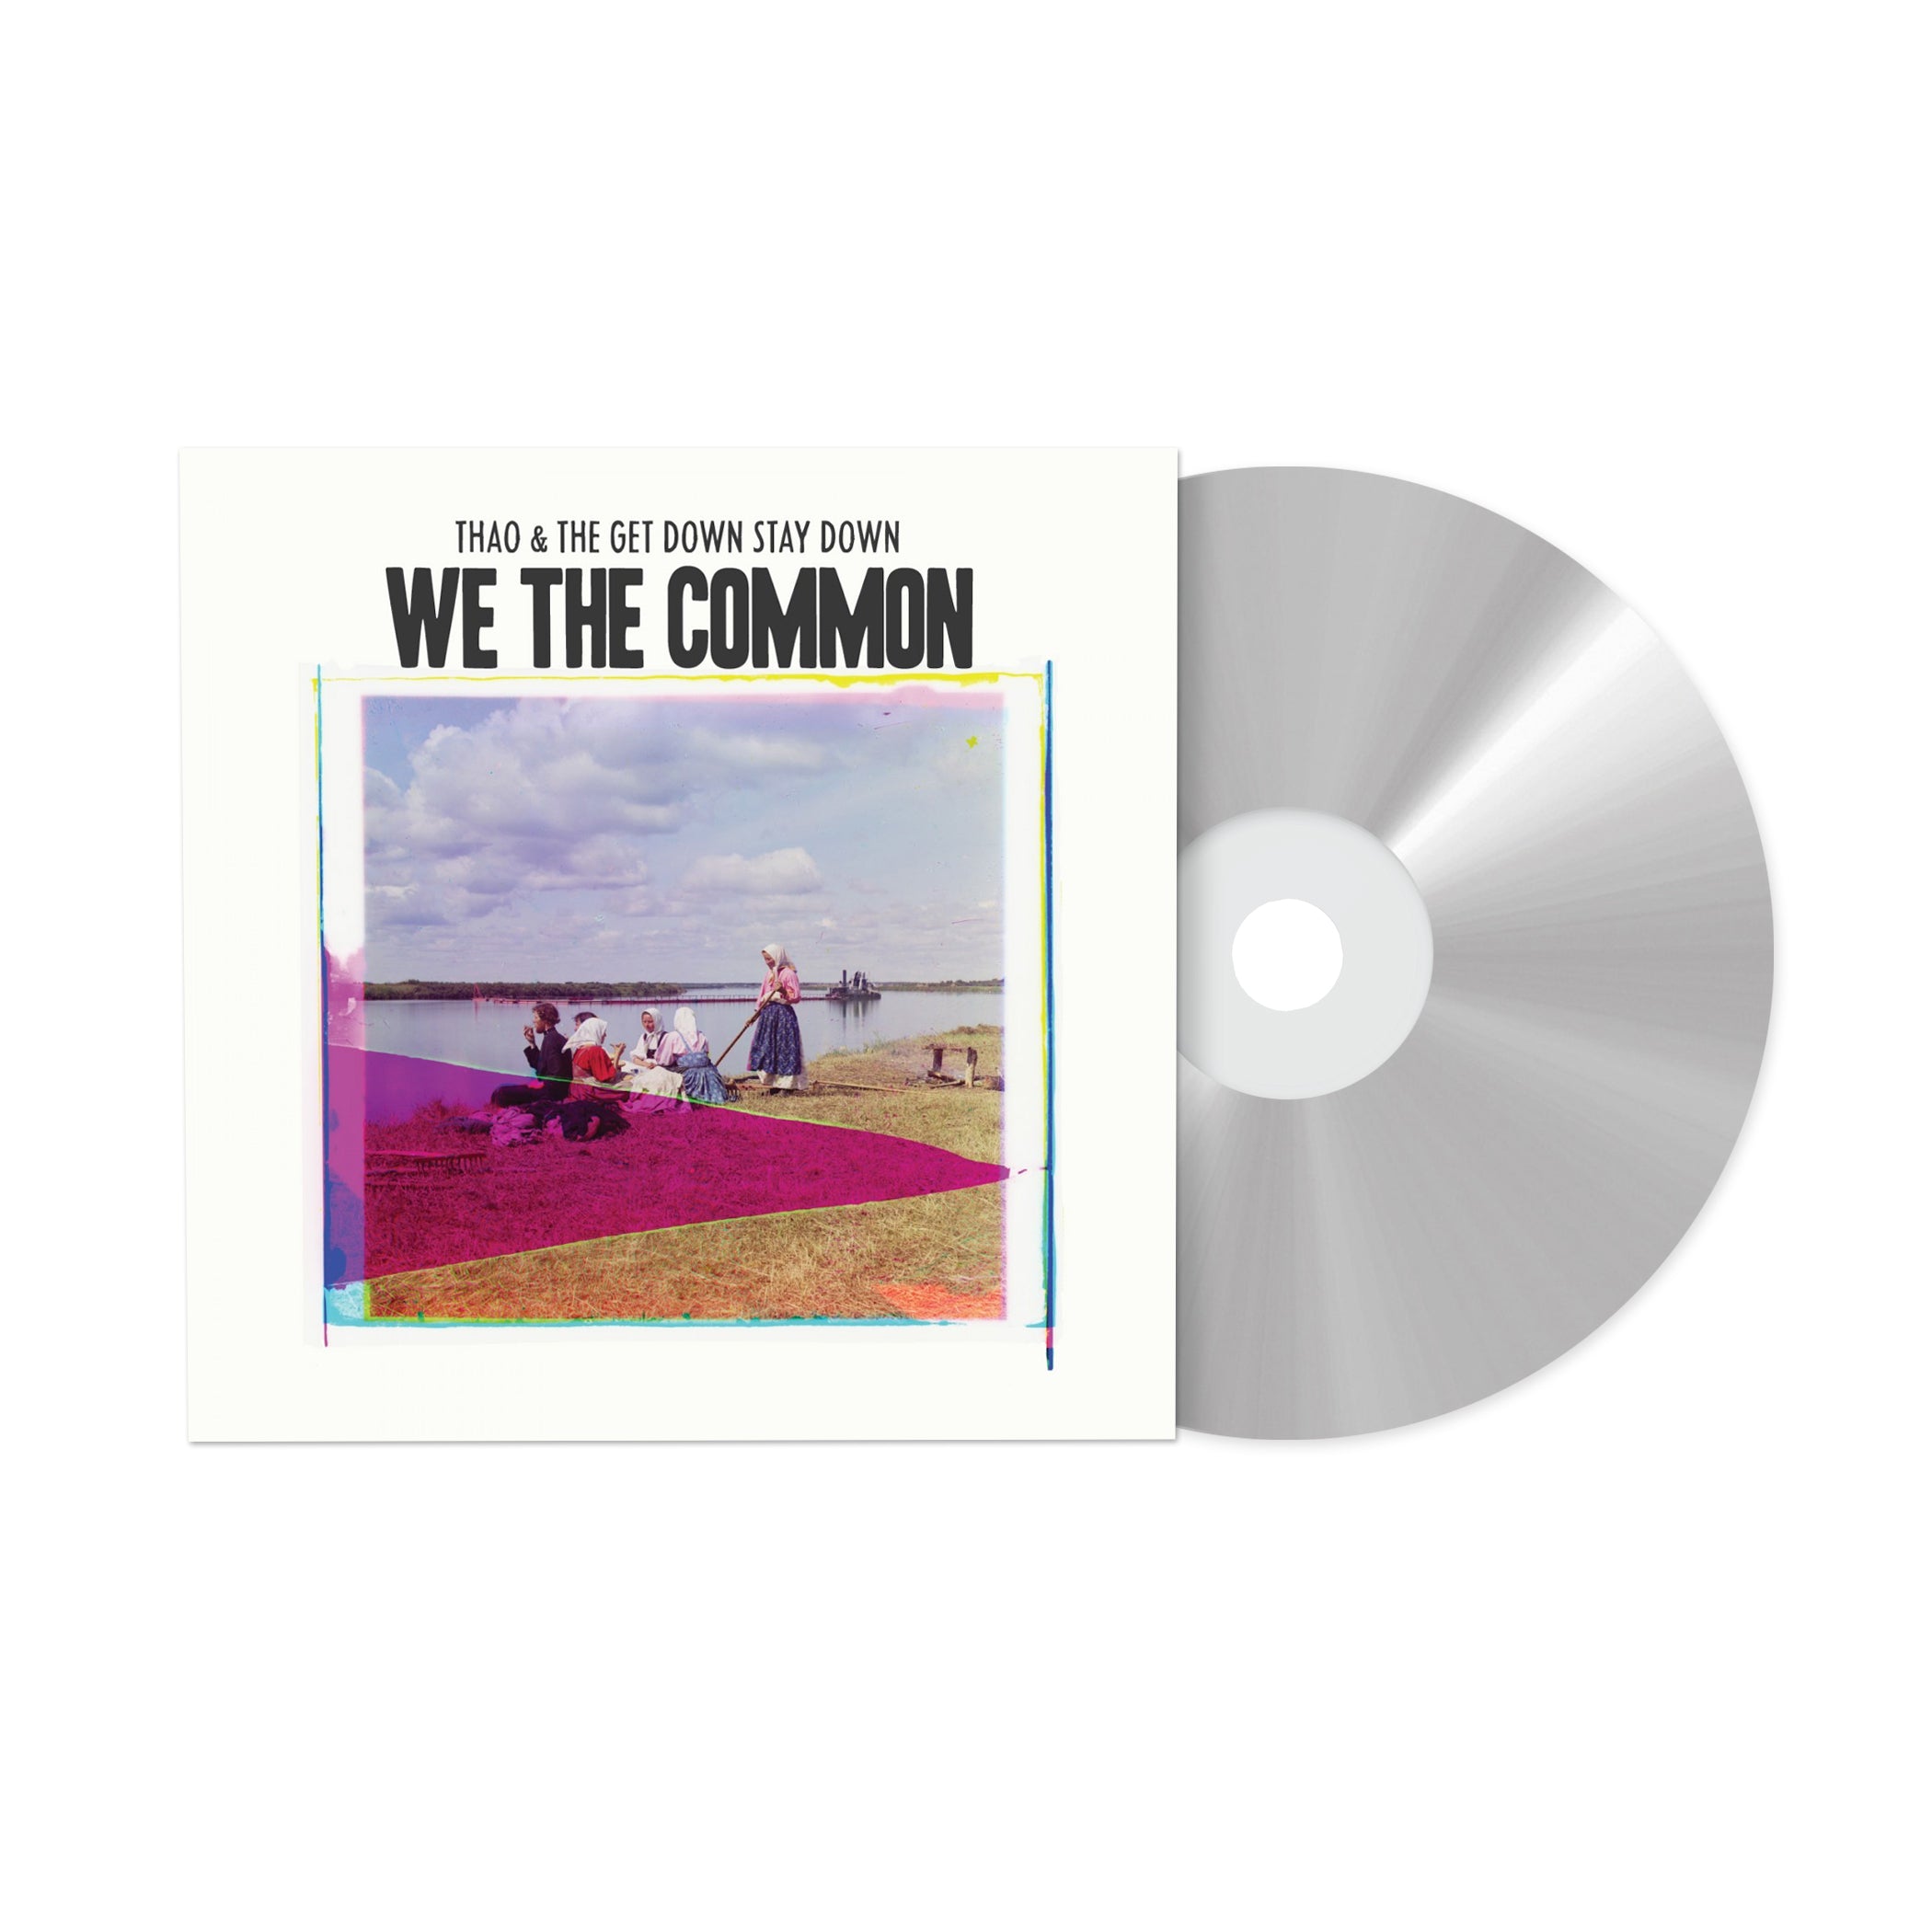 Thao & The Get Down Stay Down "We The Common" LP/CD